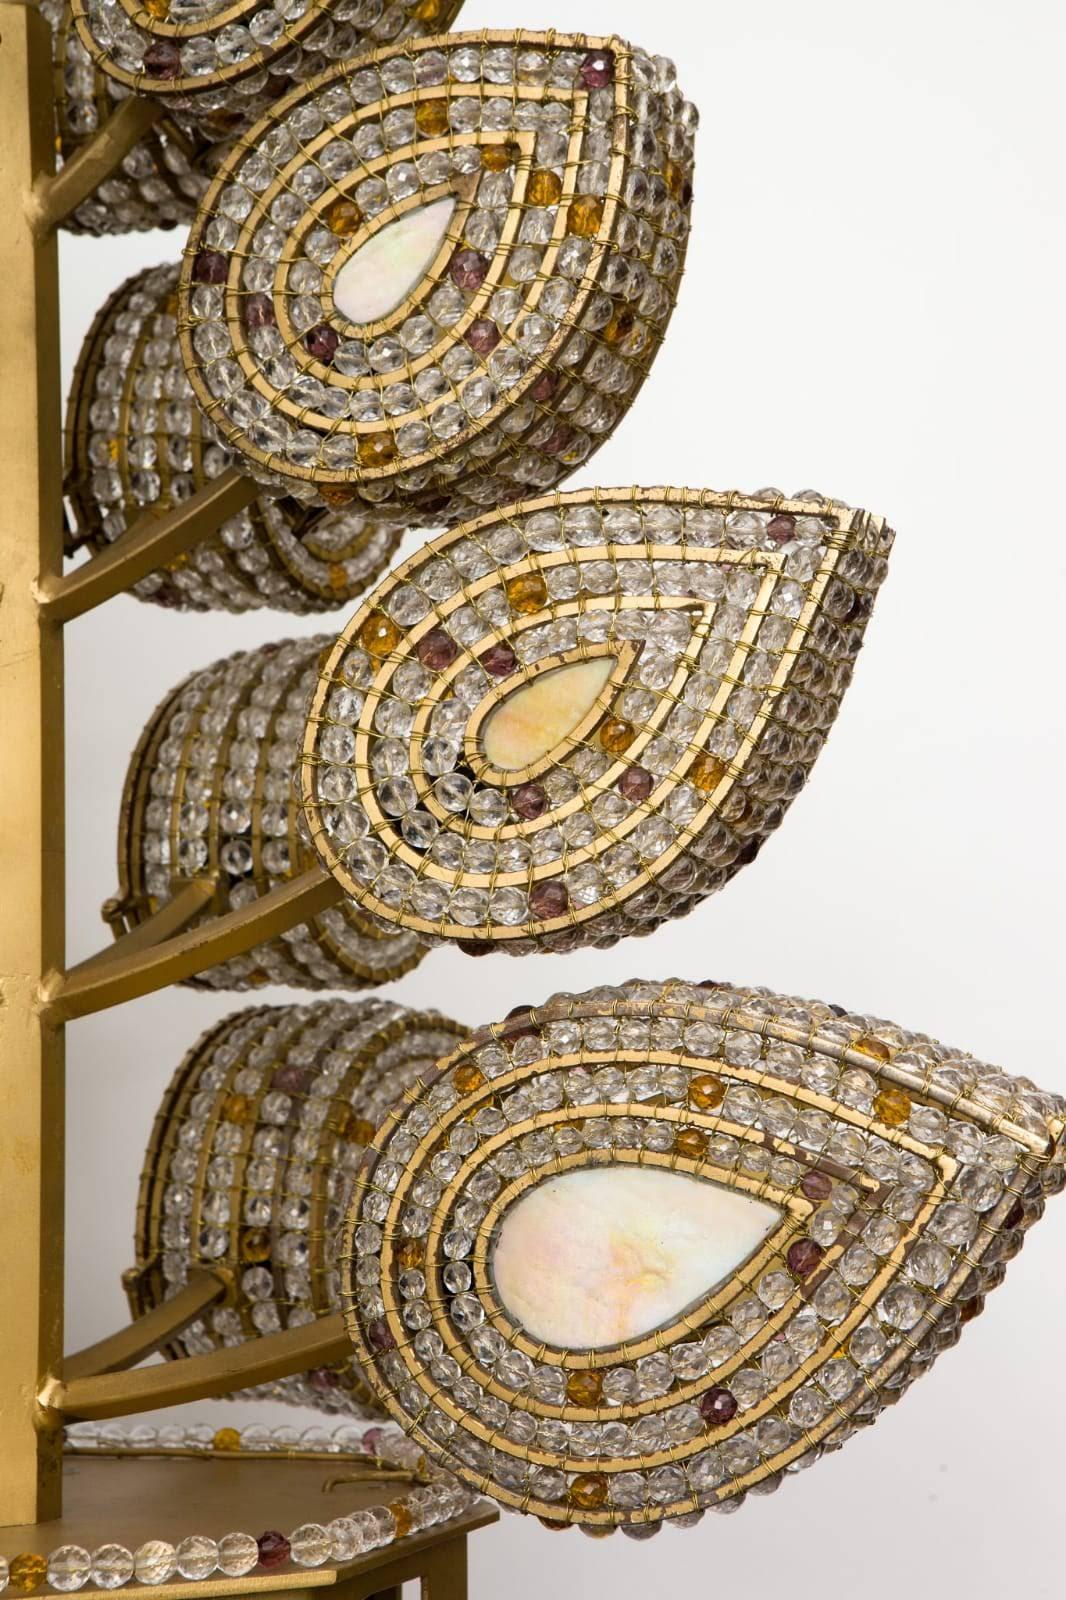 Handcrafted chandelier composed of a gold colored iron frame interlaced by more than 5,000 faceted glass beads and Madre Pearl like Stained Glass on Center of Each Leaf.
Each leaf contains a candelabra socket accessible by a hinged door. Conical